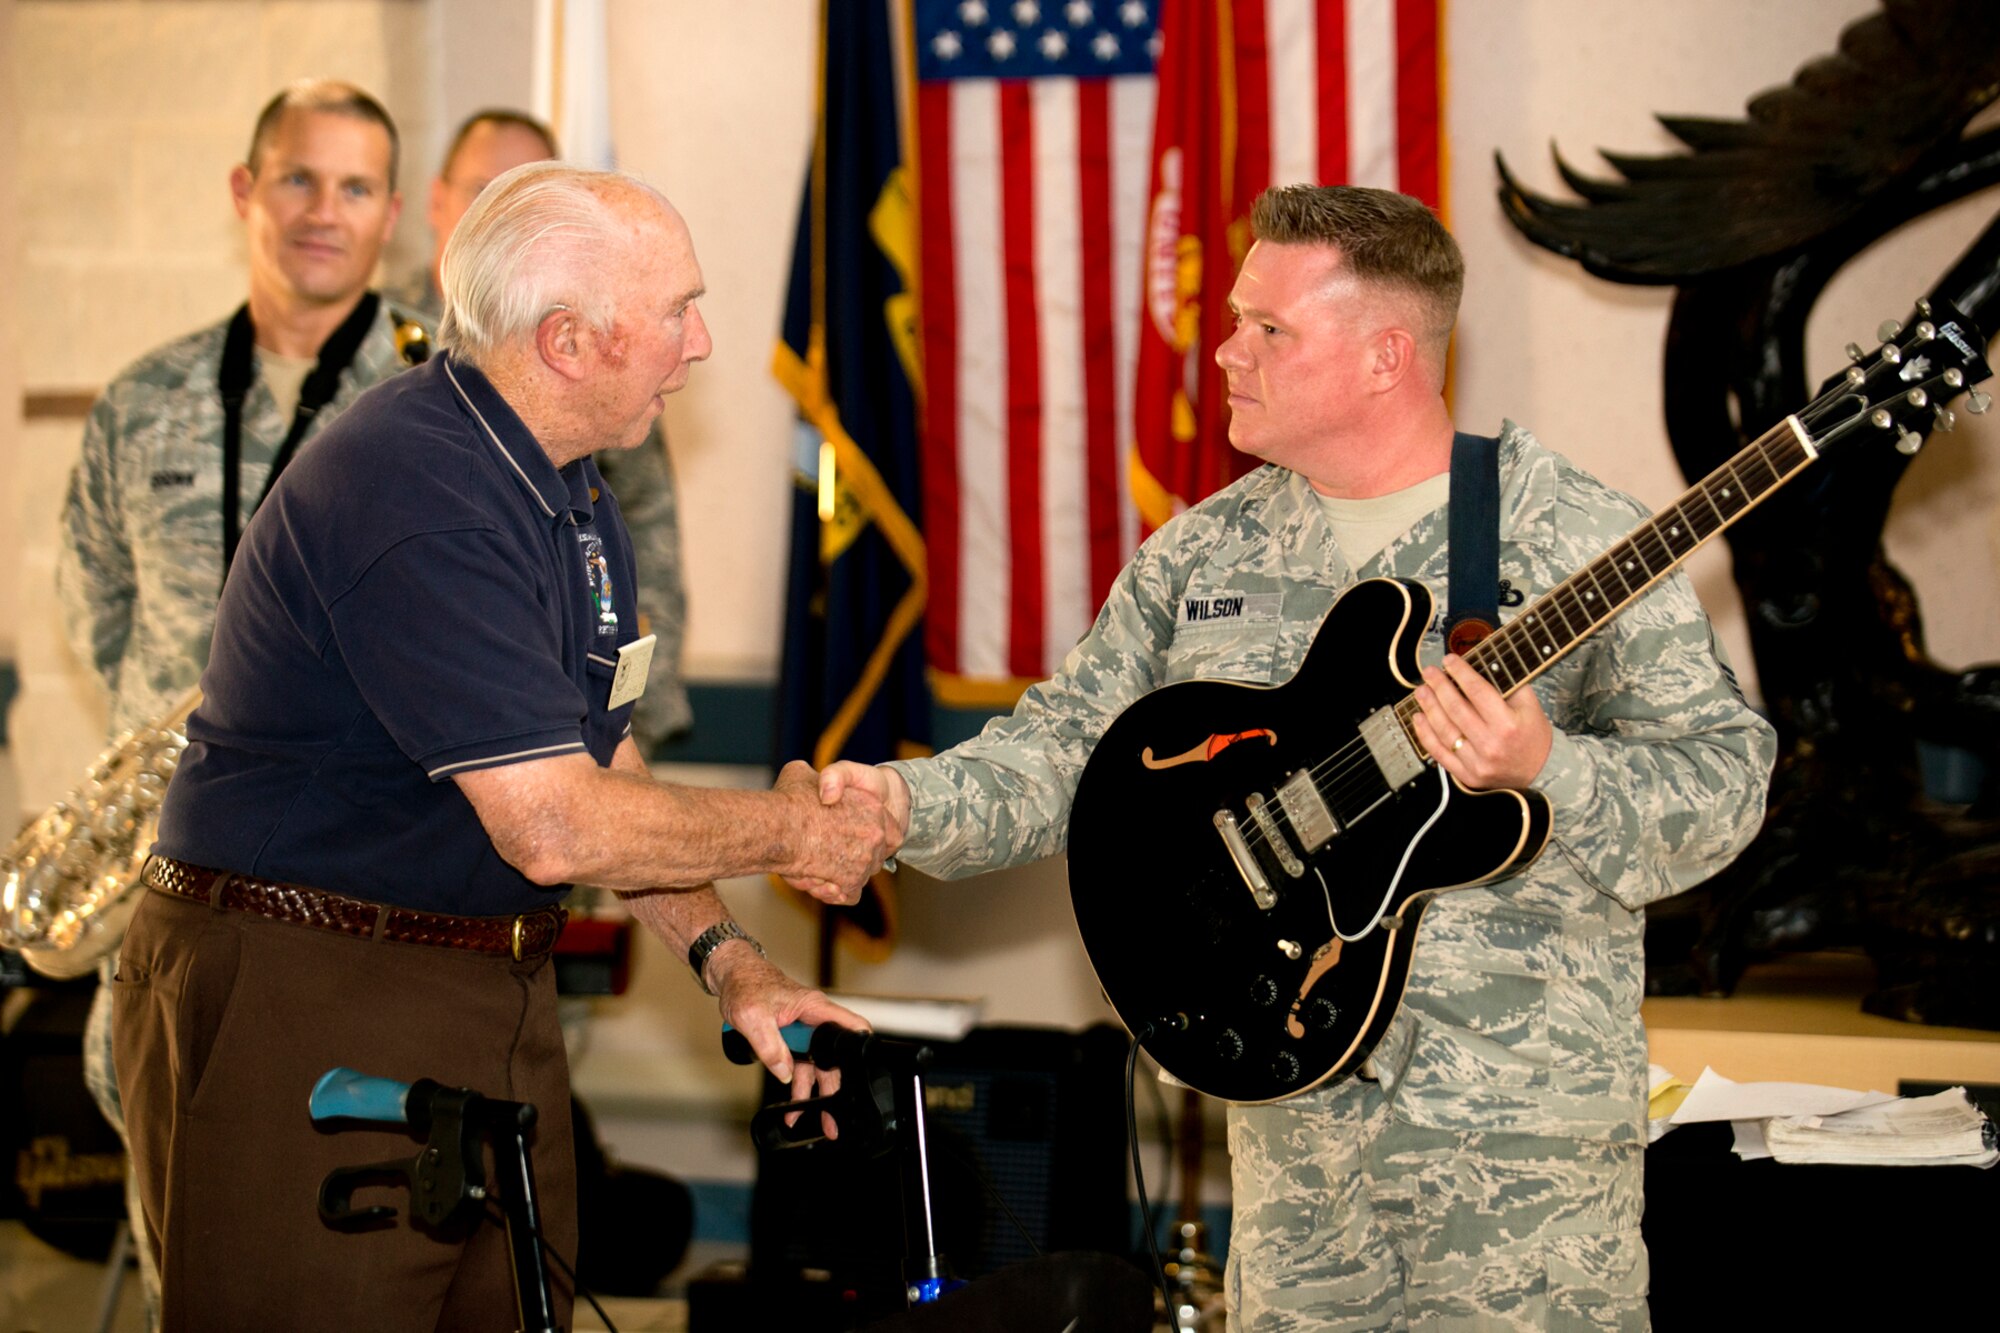 Retired U.S. Air Force Col. Steve dePyssler thanks Master Sgt. Steve Wilson for performing at the Northwest Louisiana Veterans Home, Nov. 6, 2012, Bossier City, La. Wilson and his ensemble are members of the U.S. Air Force Band of the West and are in town to support the Global Strike Challenge score posting ceremony. (U.S. Air Force photo by Master Sgt. Greg Steele/Released)